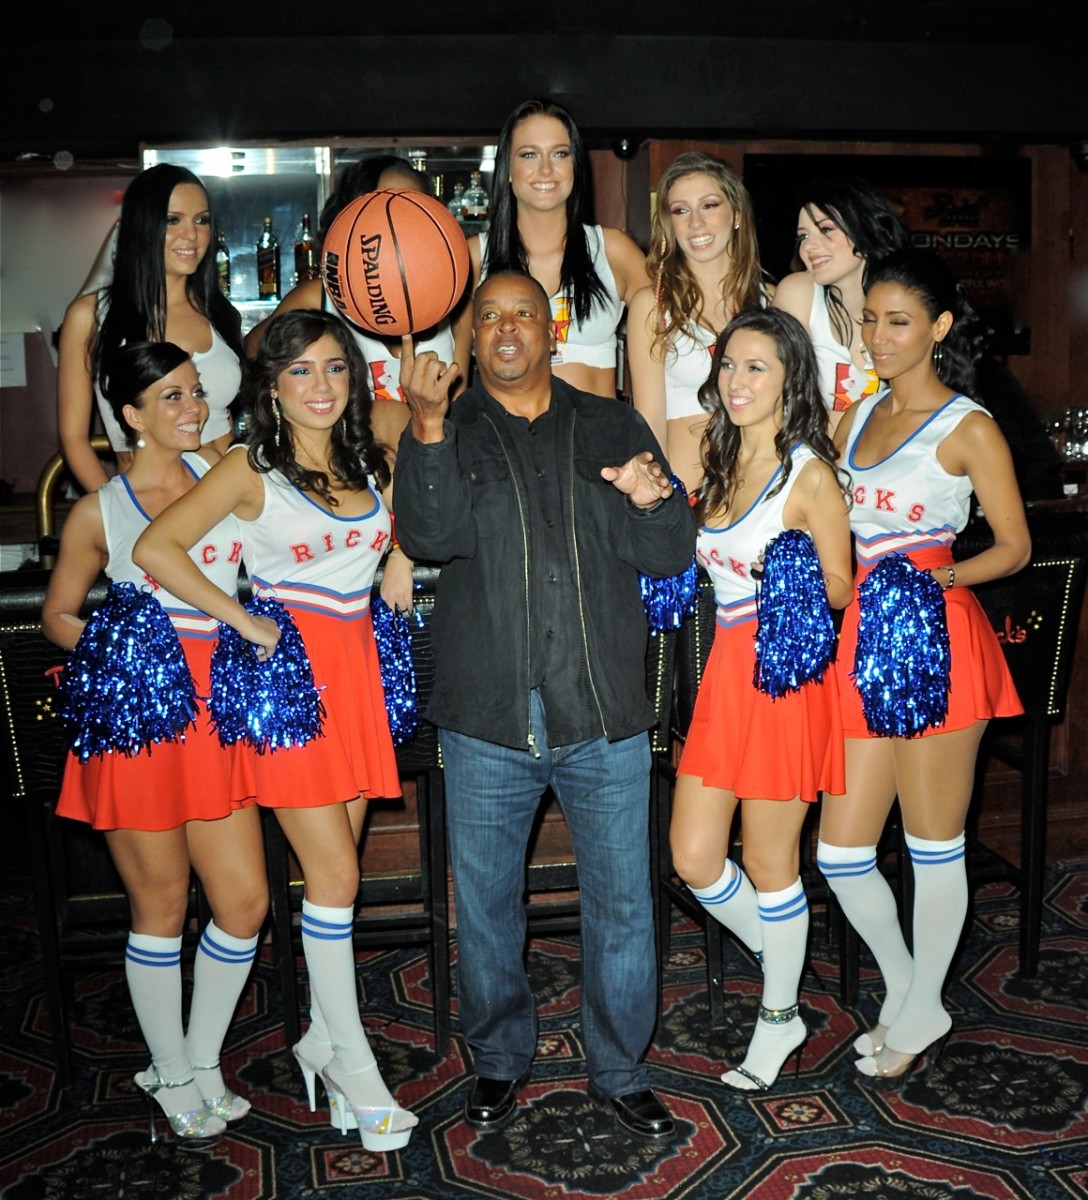 Spud Webb Was Named Coach To A Stripper Basketball Team During The NBA Lockout In 2011